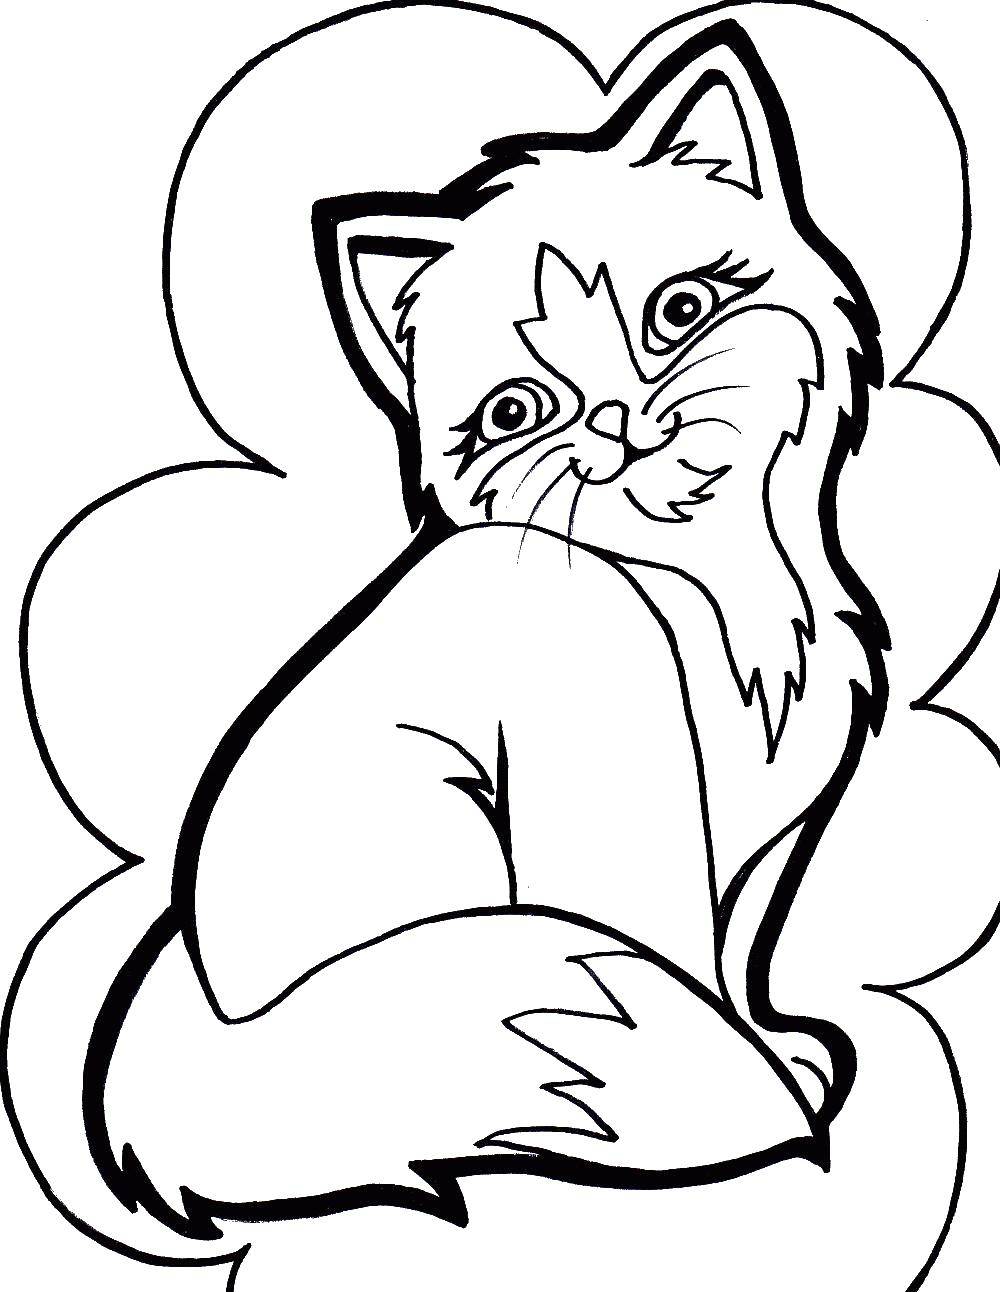 Coloring Kohncke. Category Animals. Tags:  animals, cat.